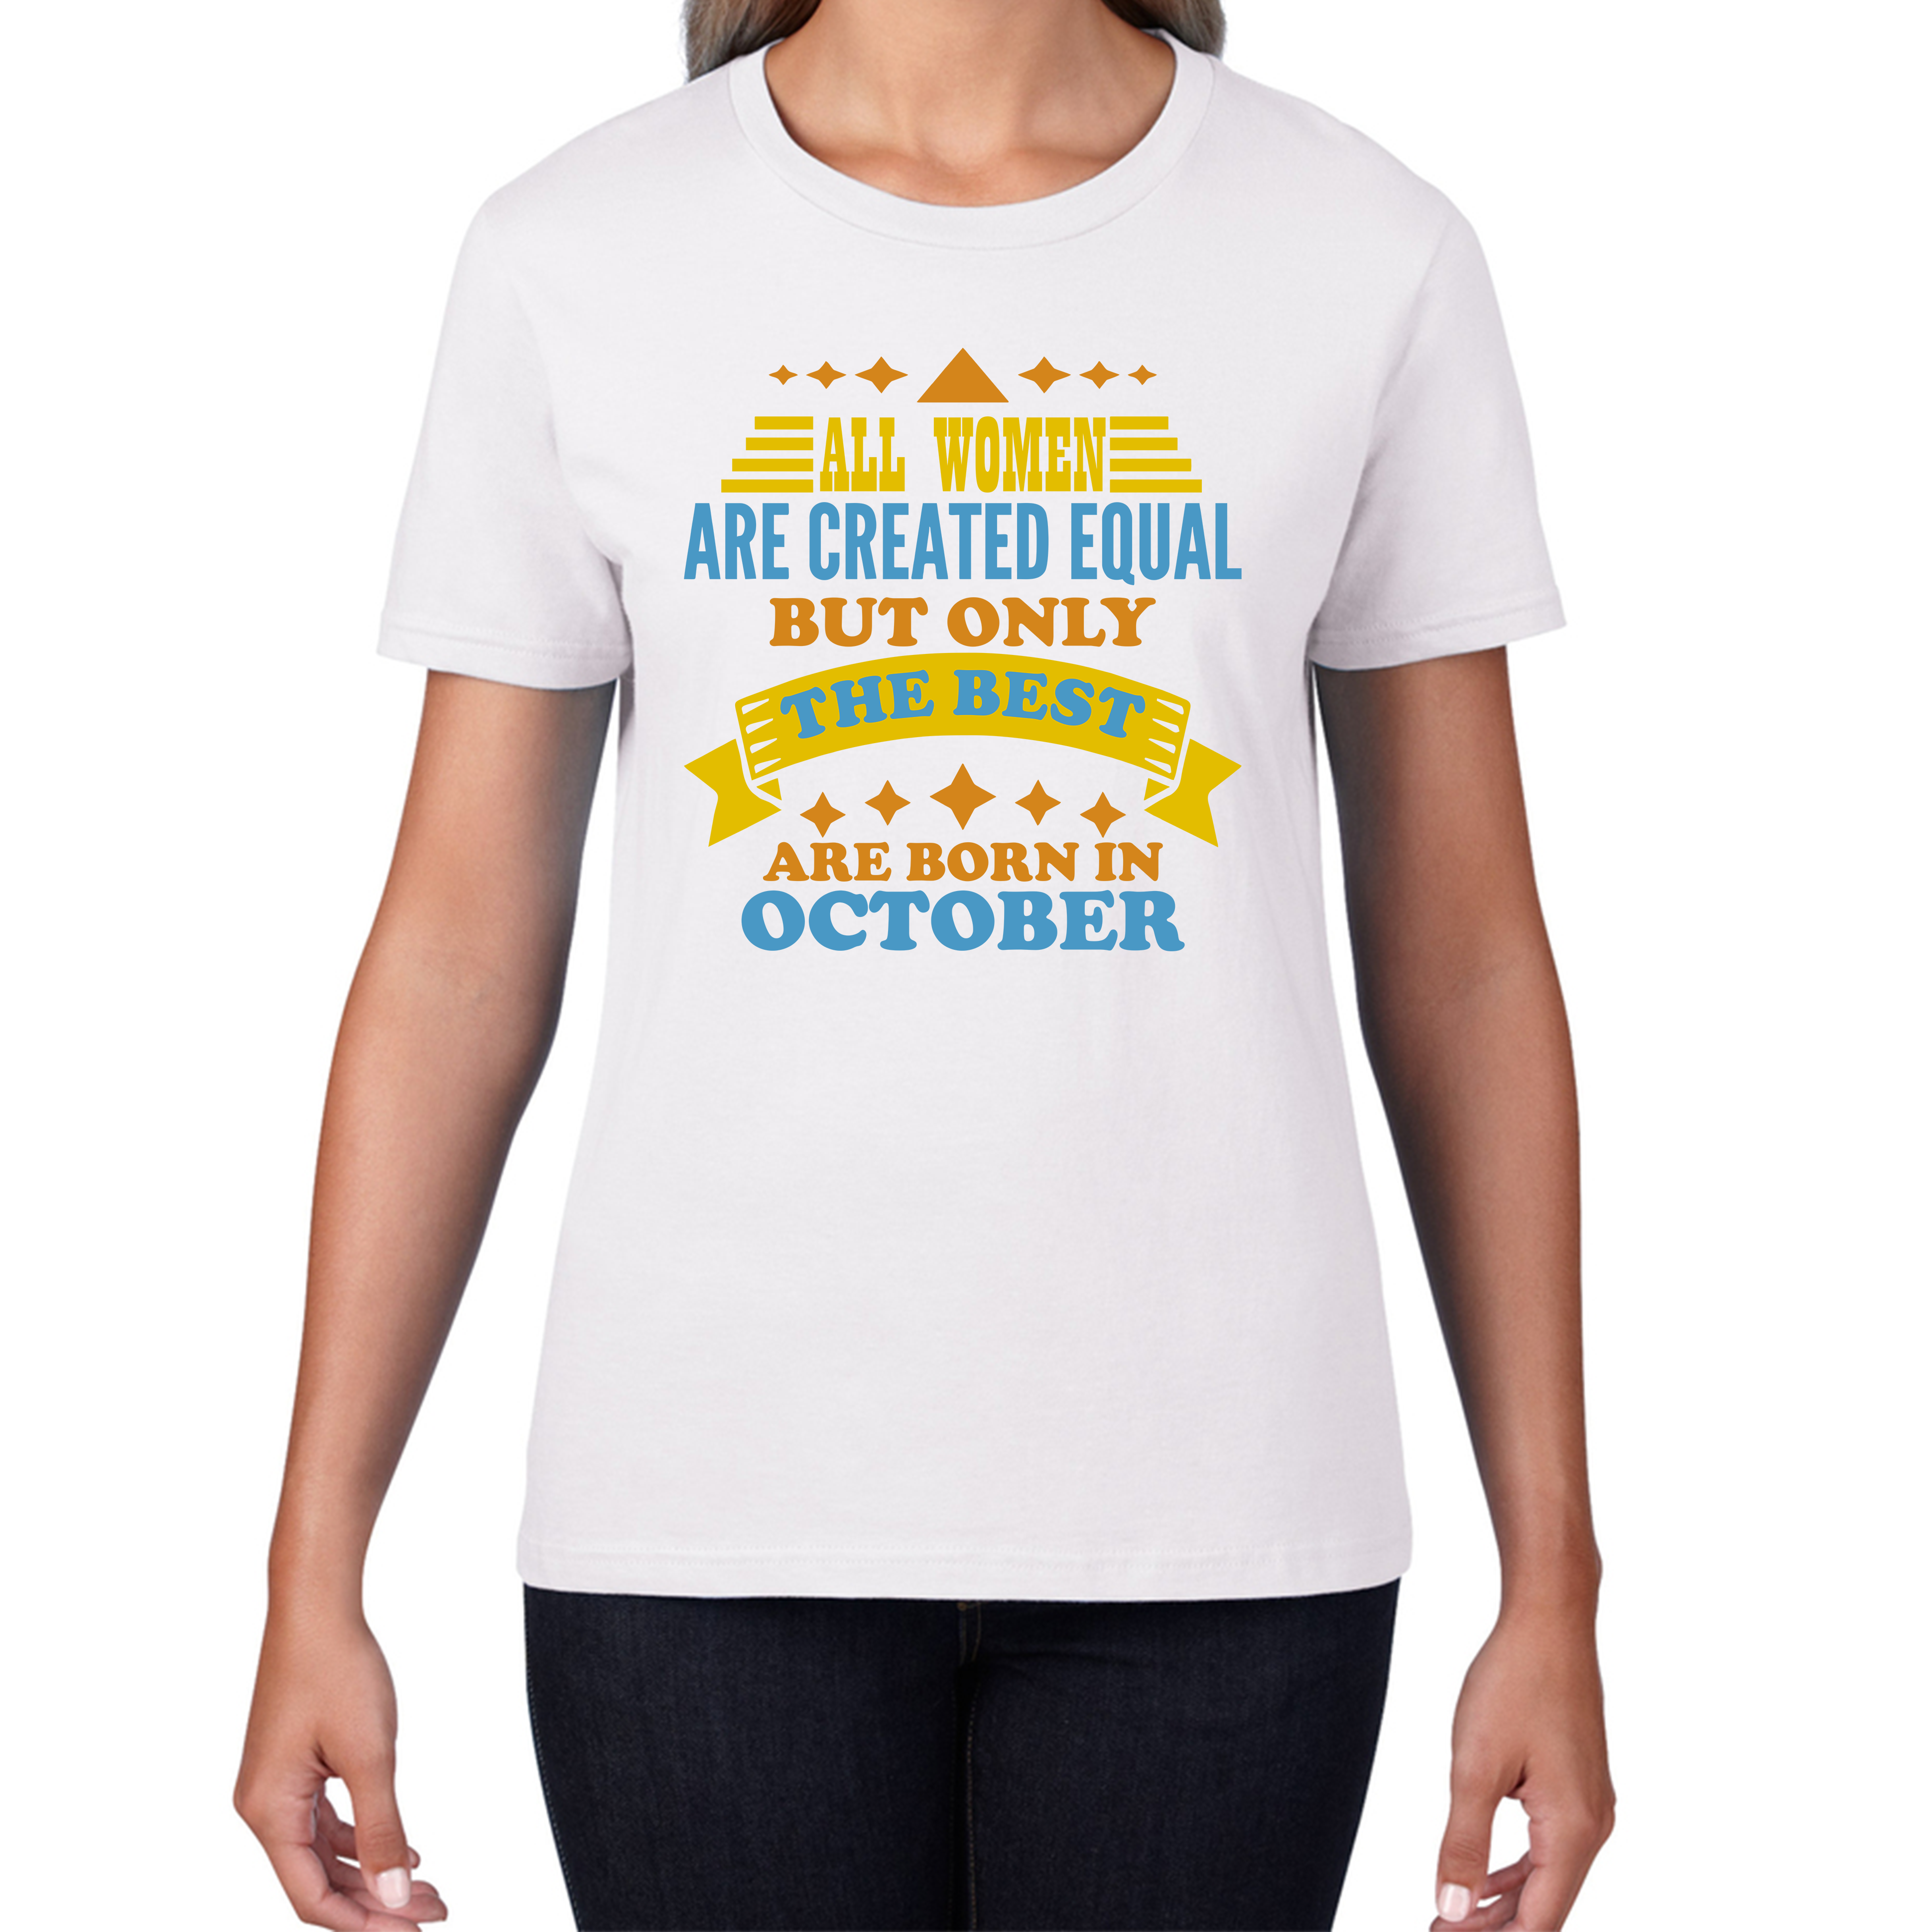 All Women Are Created Equal But Only The Best Are Born In October Funny Birthday Quote Womens Tee Top